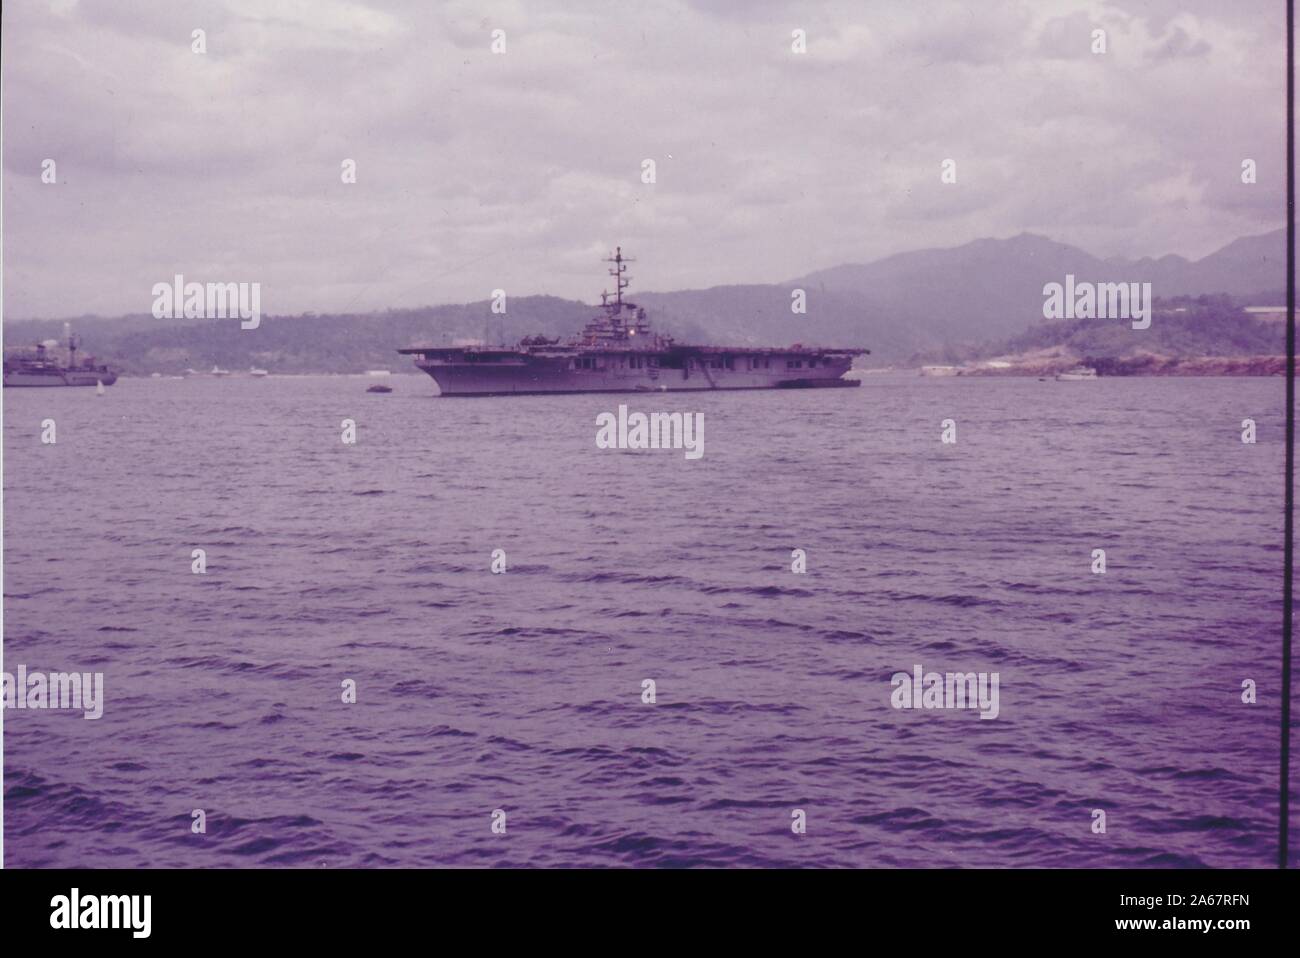 Wide shot, across open water, of an American military vessel near a mountainous coastline on an overcast day, photographed during the Vietnam War, 1965. () Stock Photo